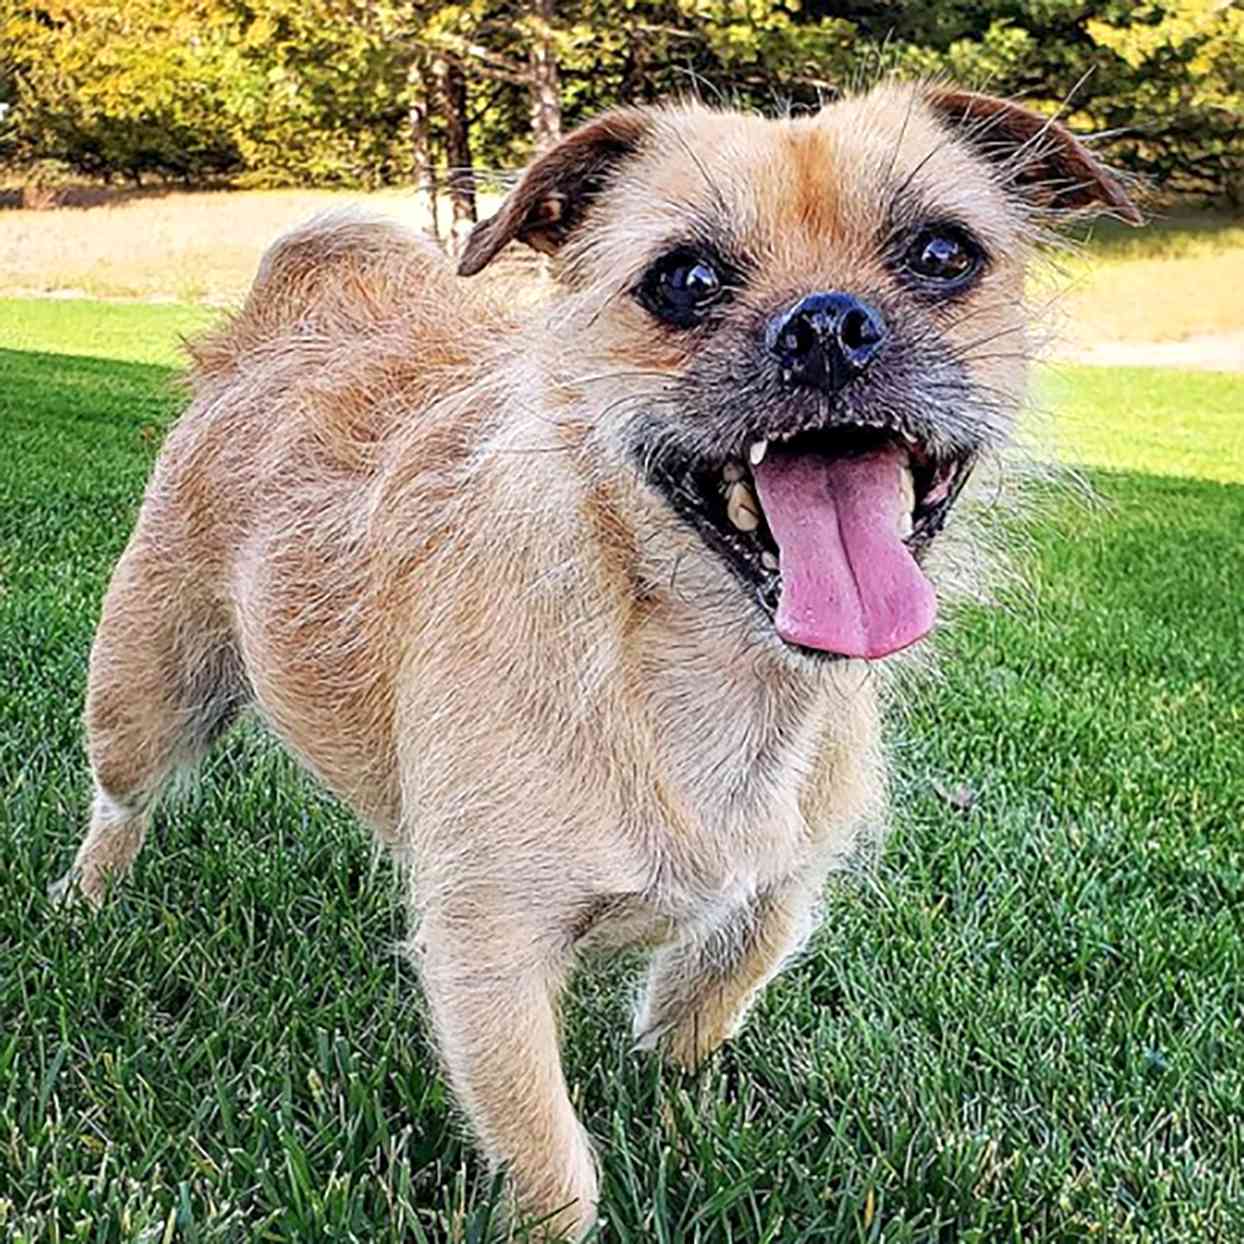 Pugshire, Pug Yorkie mix, standing in grass